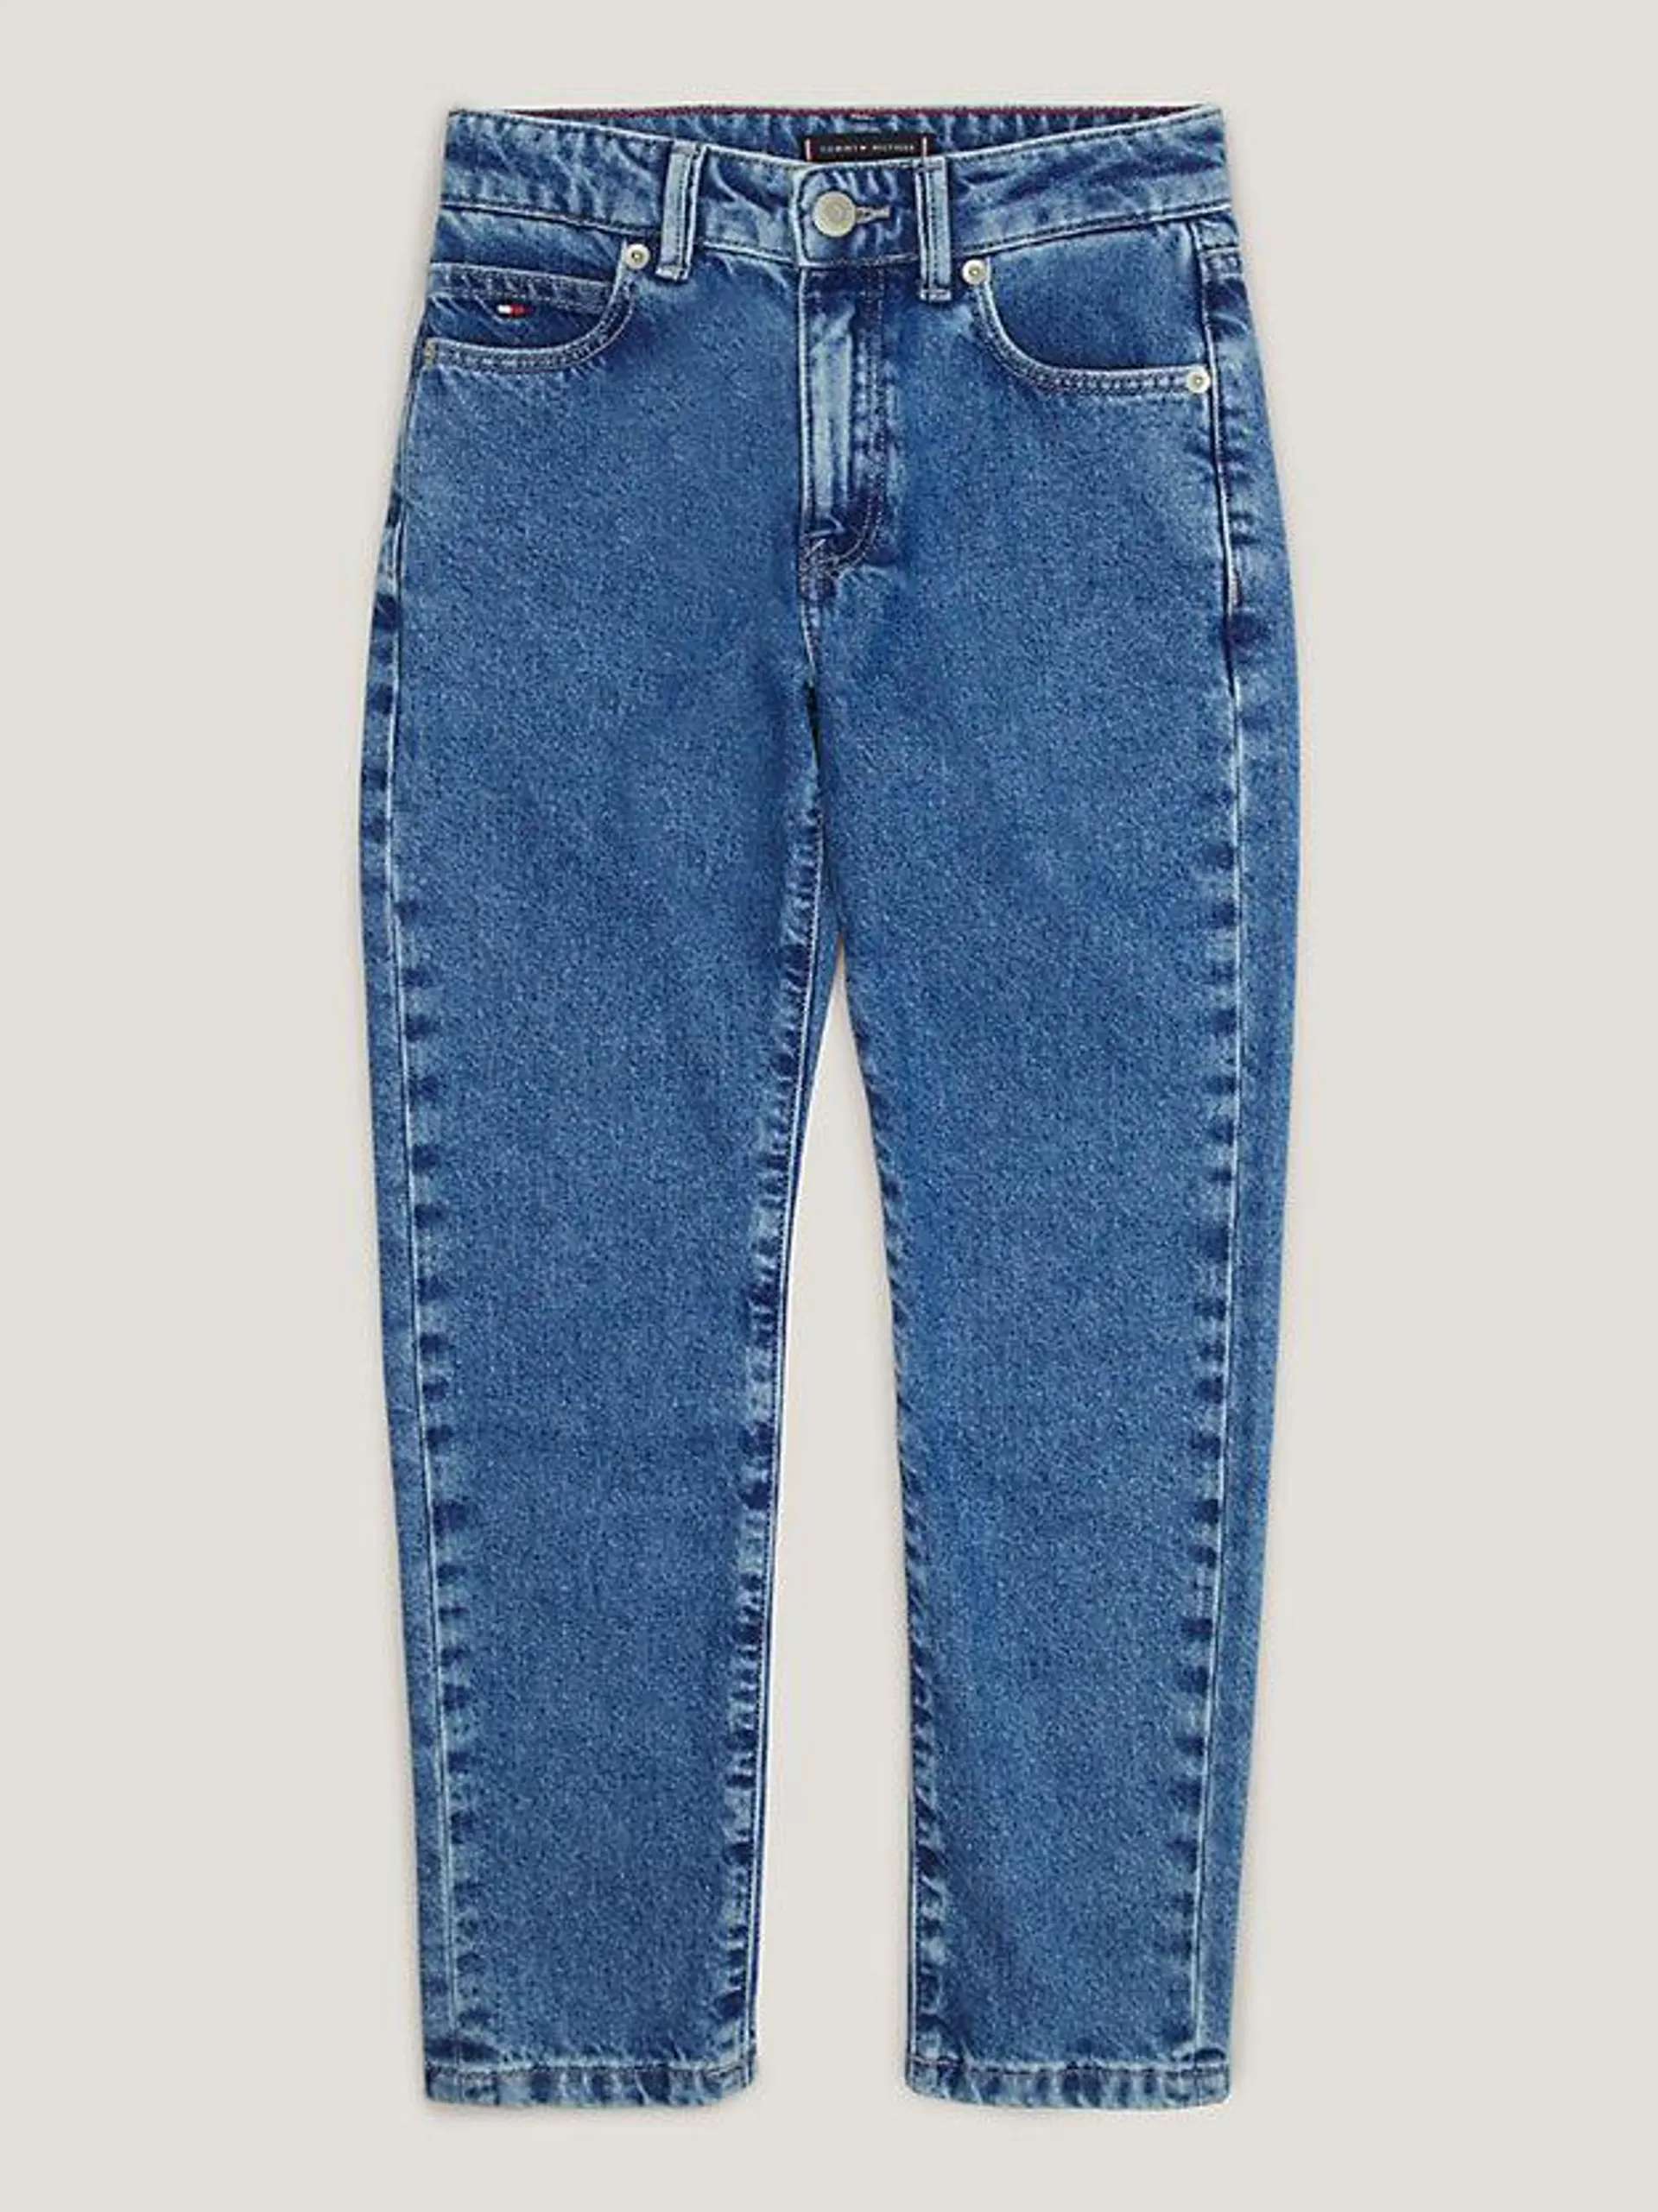 TH Modern Straight Water Repellent Jeans